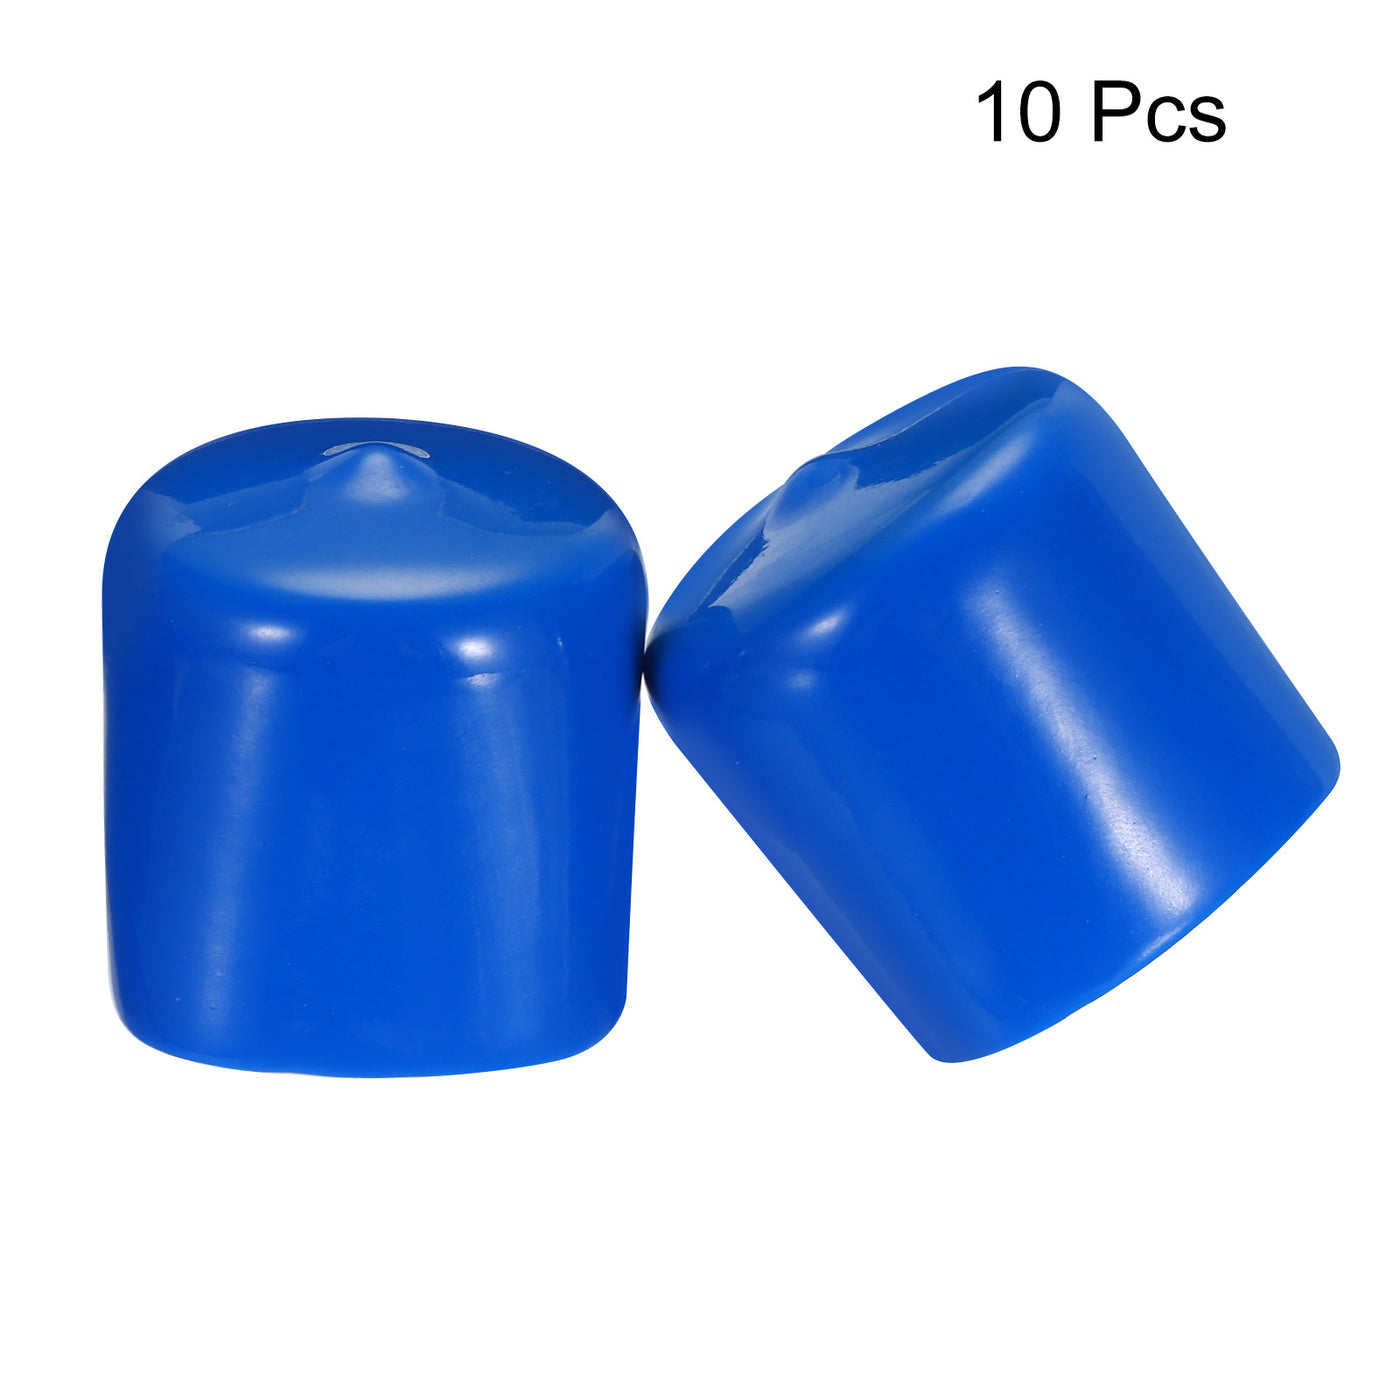 uxcell Uxcell 10pcs Rubber End Caps 34mm ID Vinyl Round End Cap Cover Screw Thread Protectors Blue